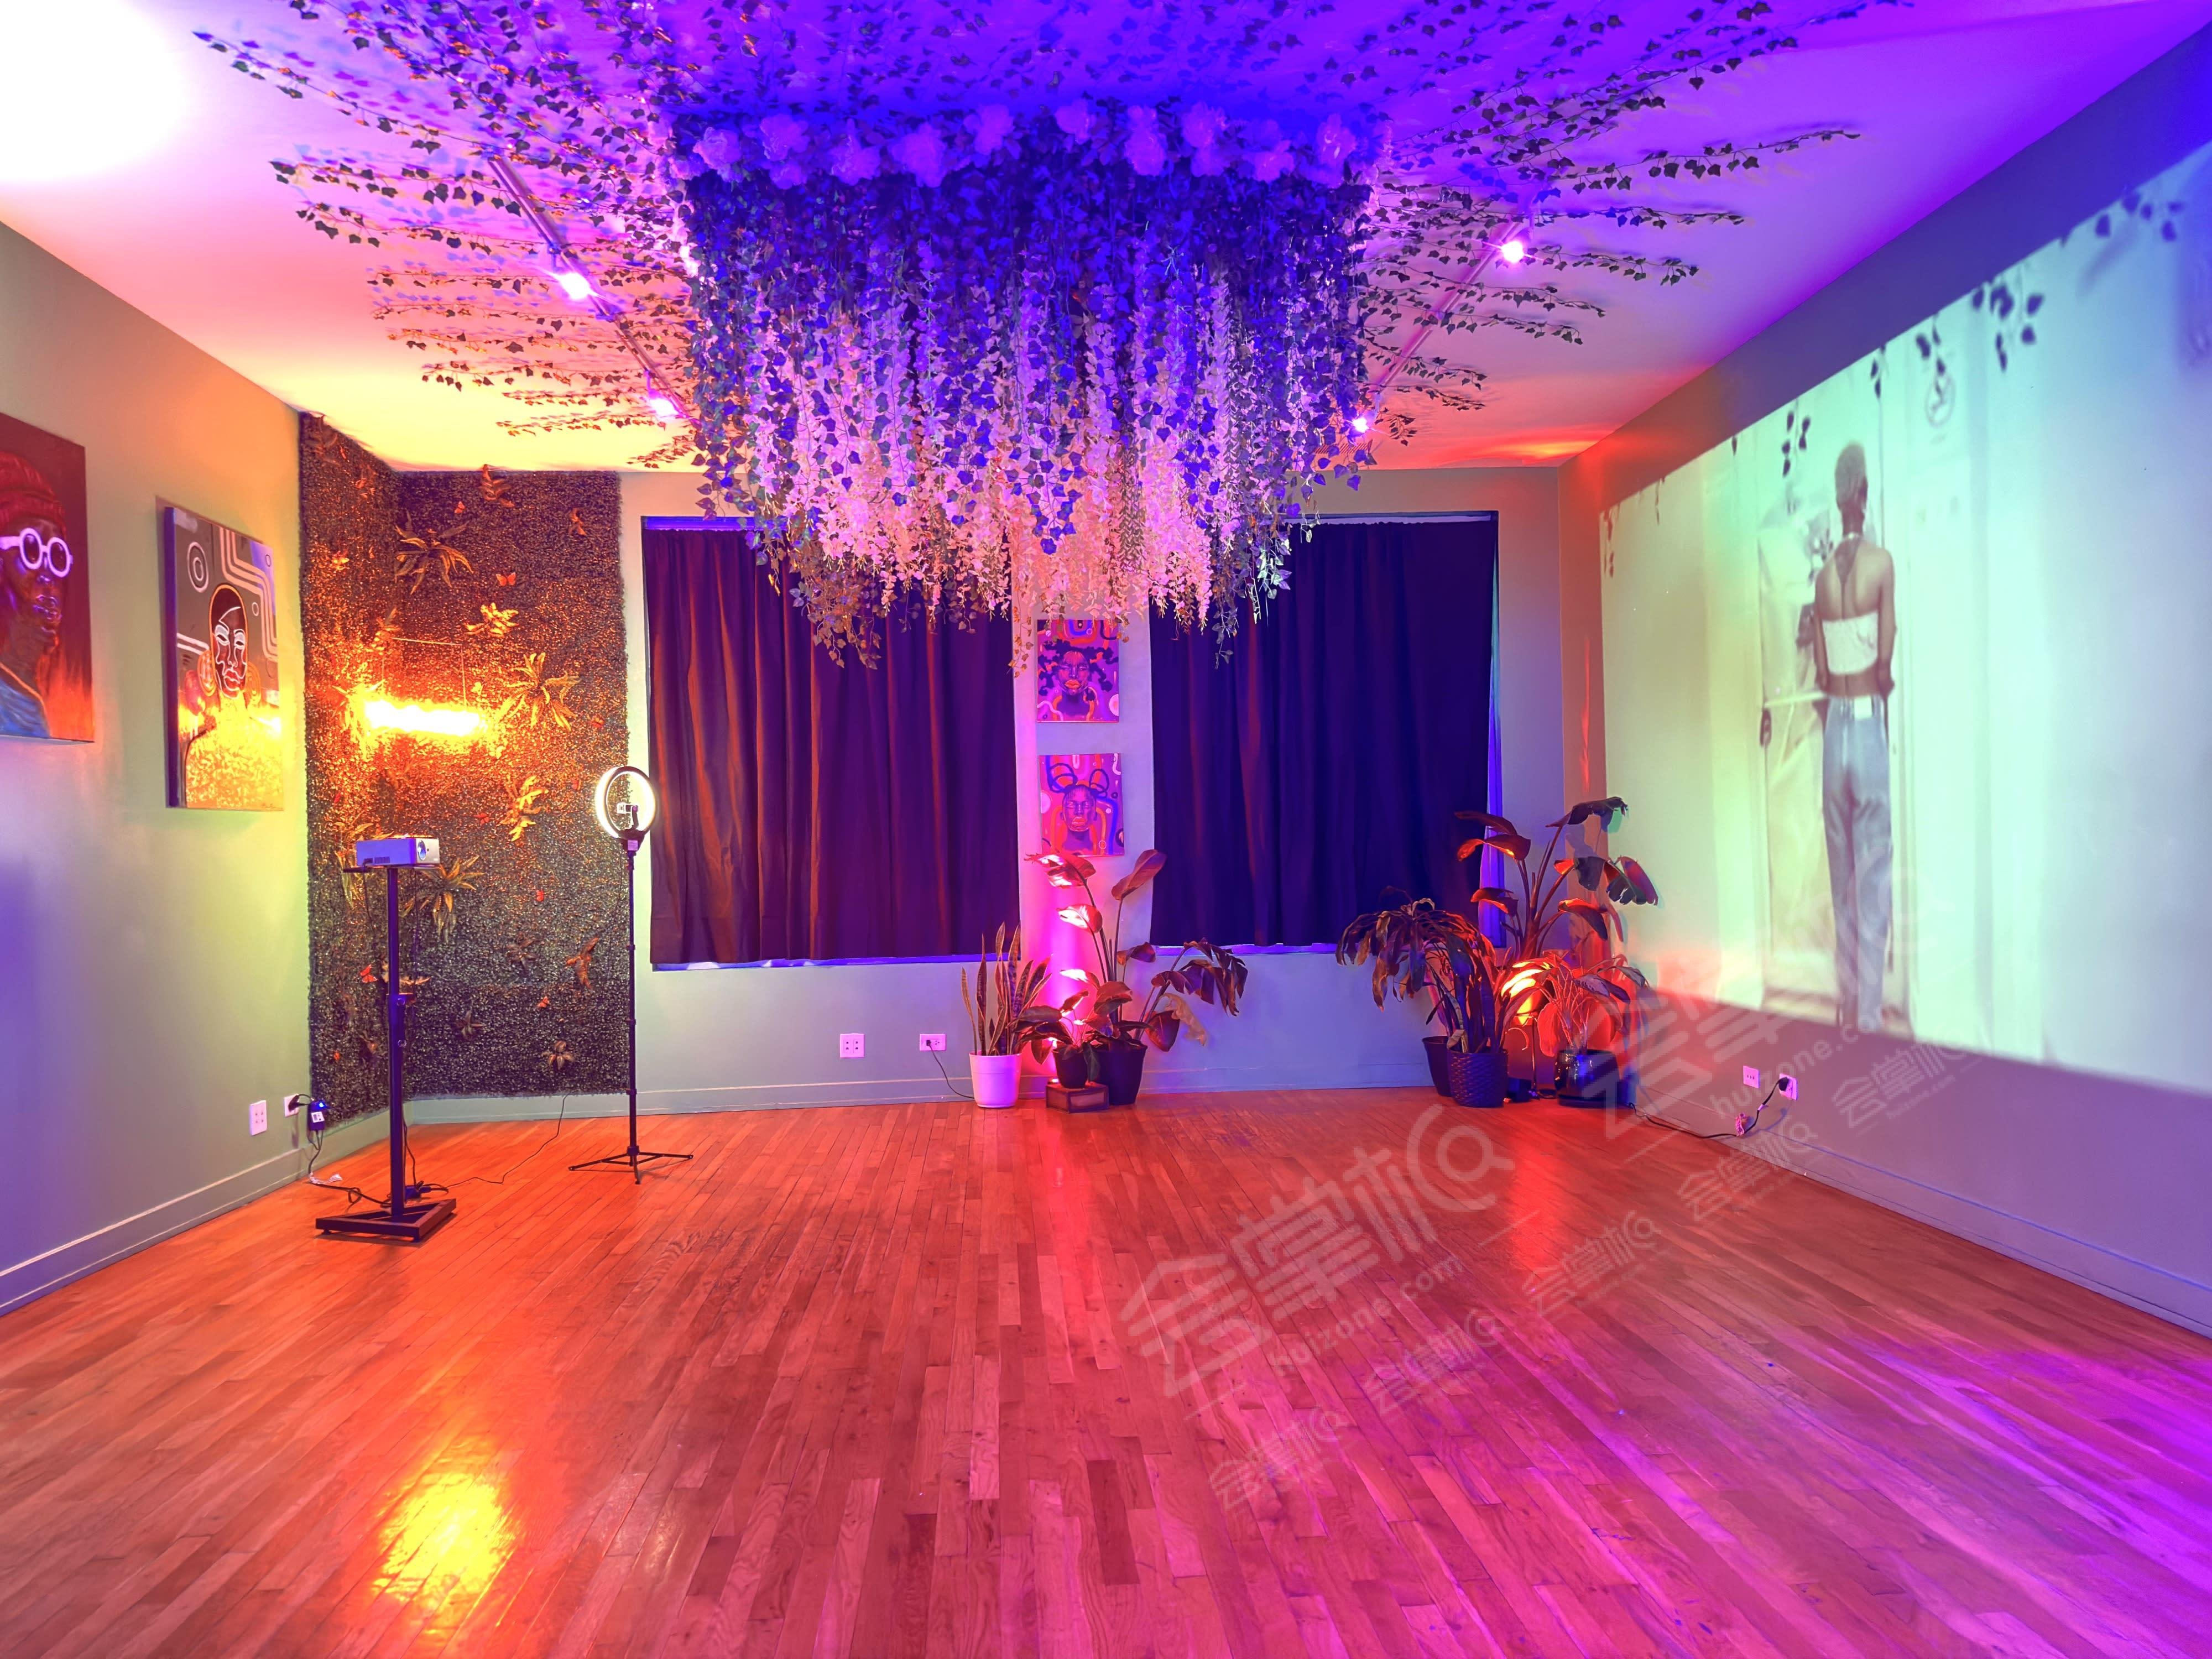 Creative River West Event Space